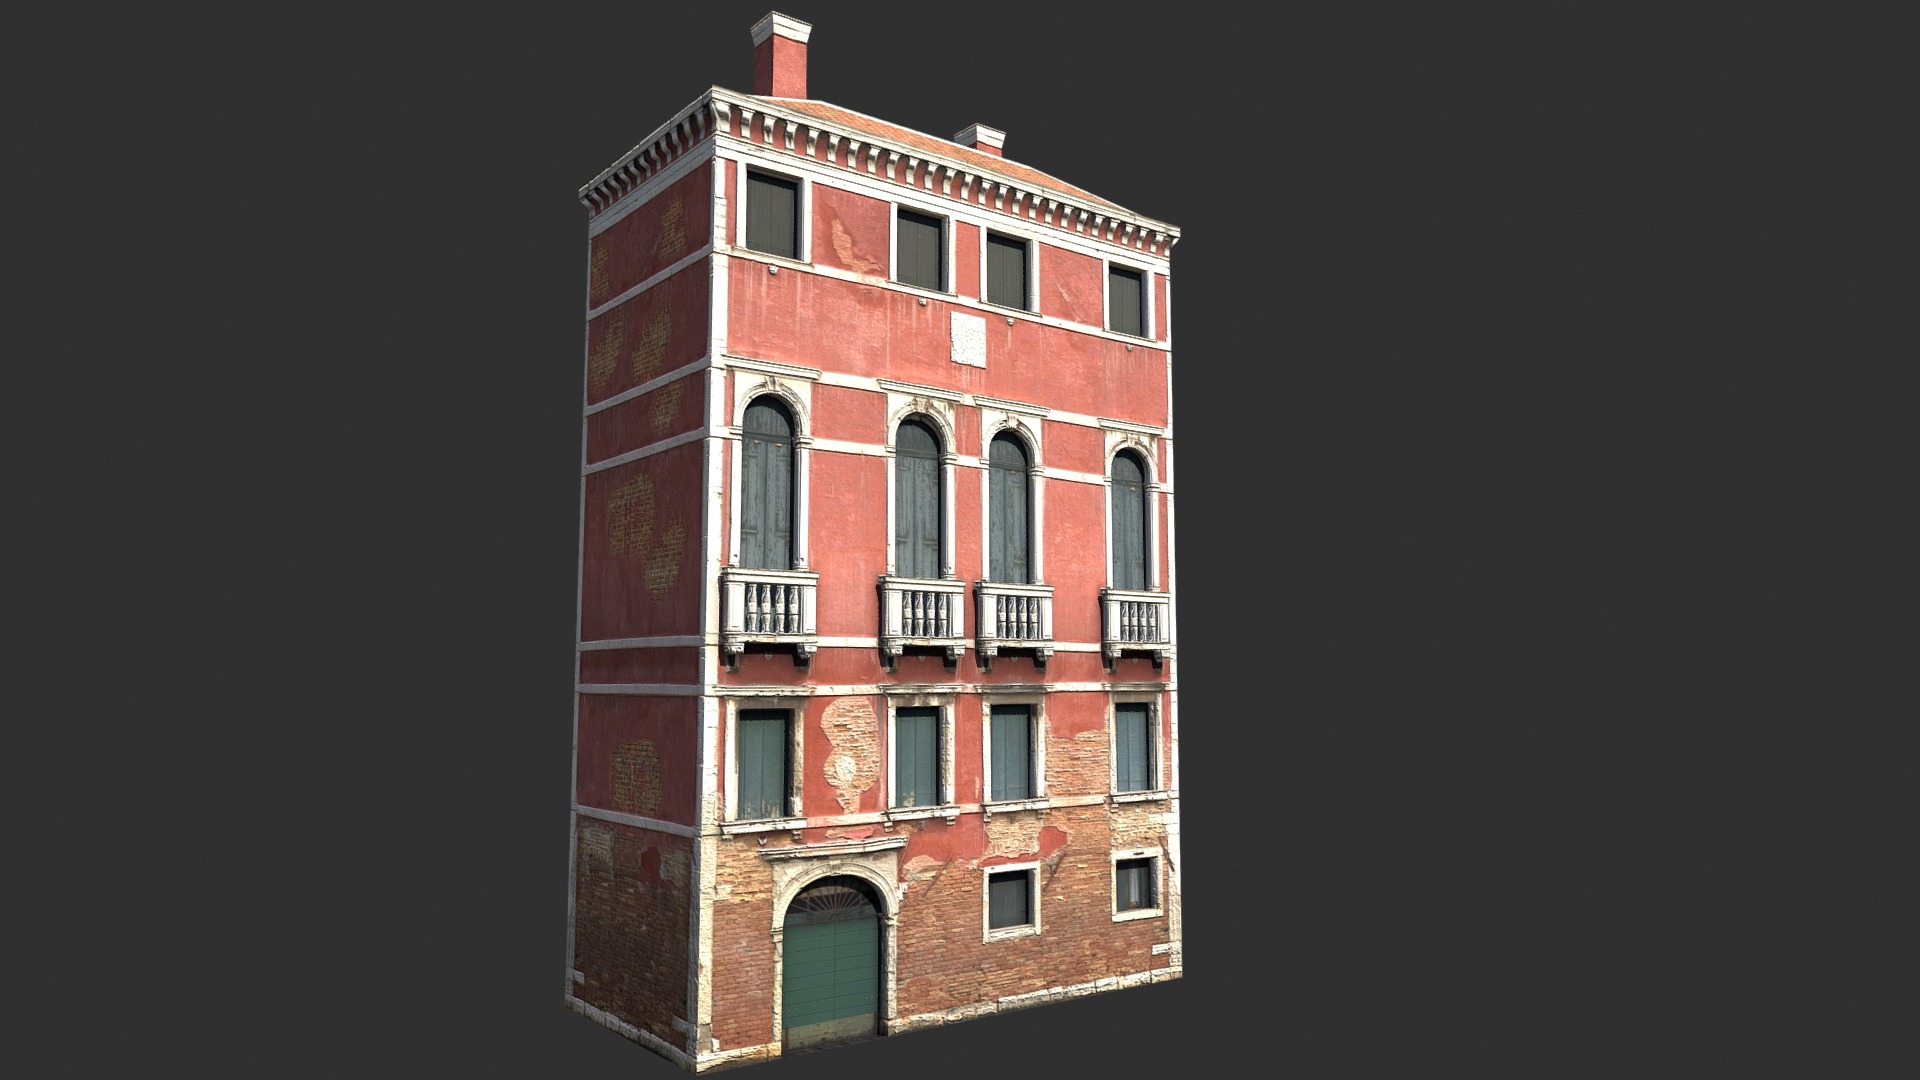 3D model Old Building #133 - This is a 3D model of the Old Building #133. The 3D model is about a brick building with a balcony.